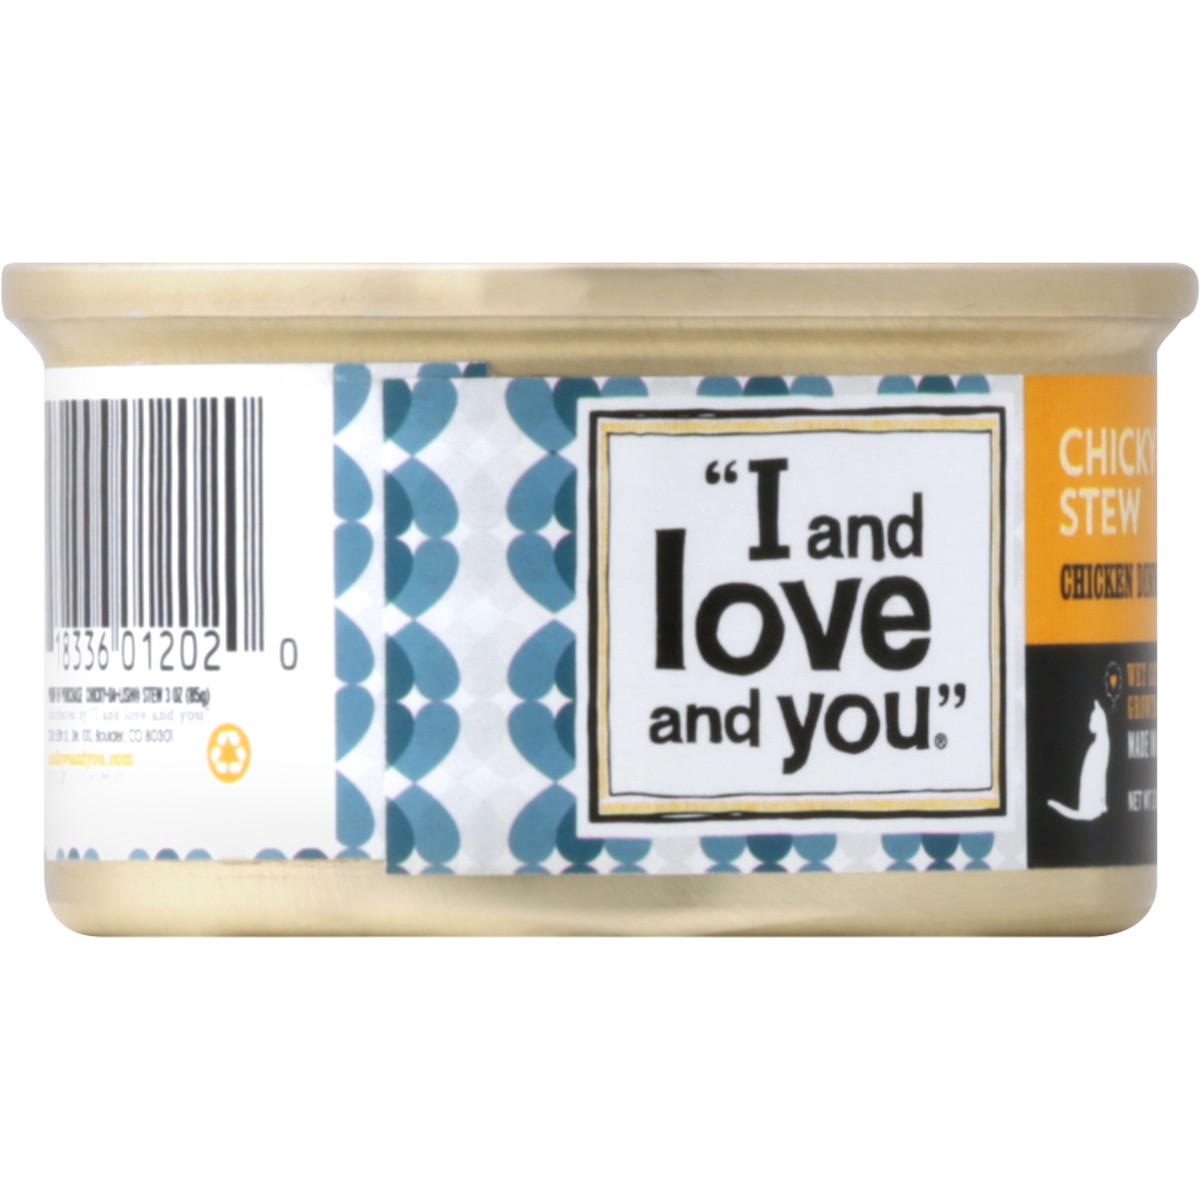 slide 10 of 10, I and Love and You Chicky Da Lish Stew Chicken Wet Cat Food, 3 oz